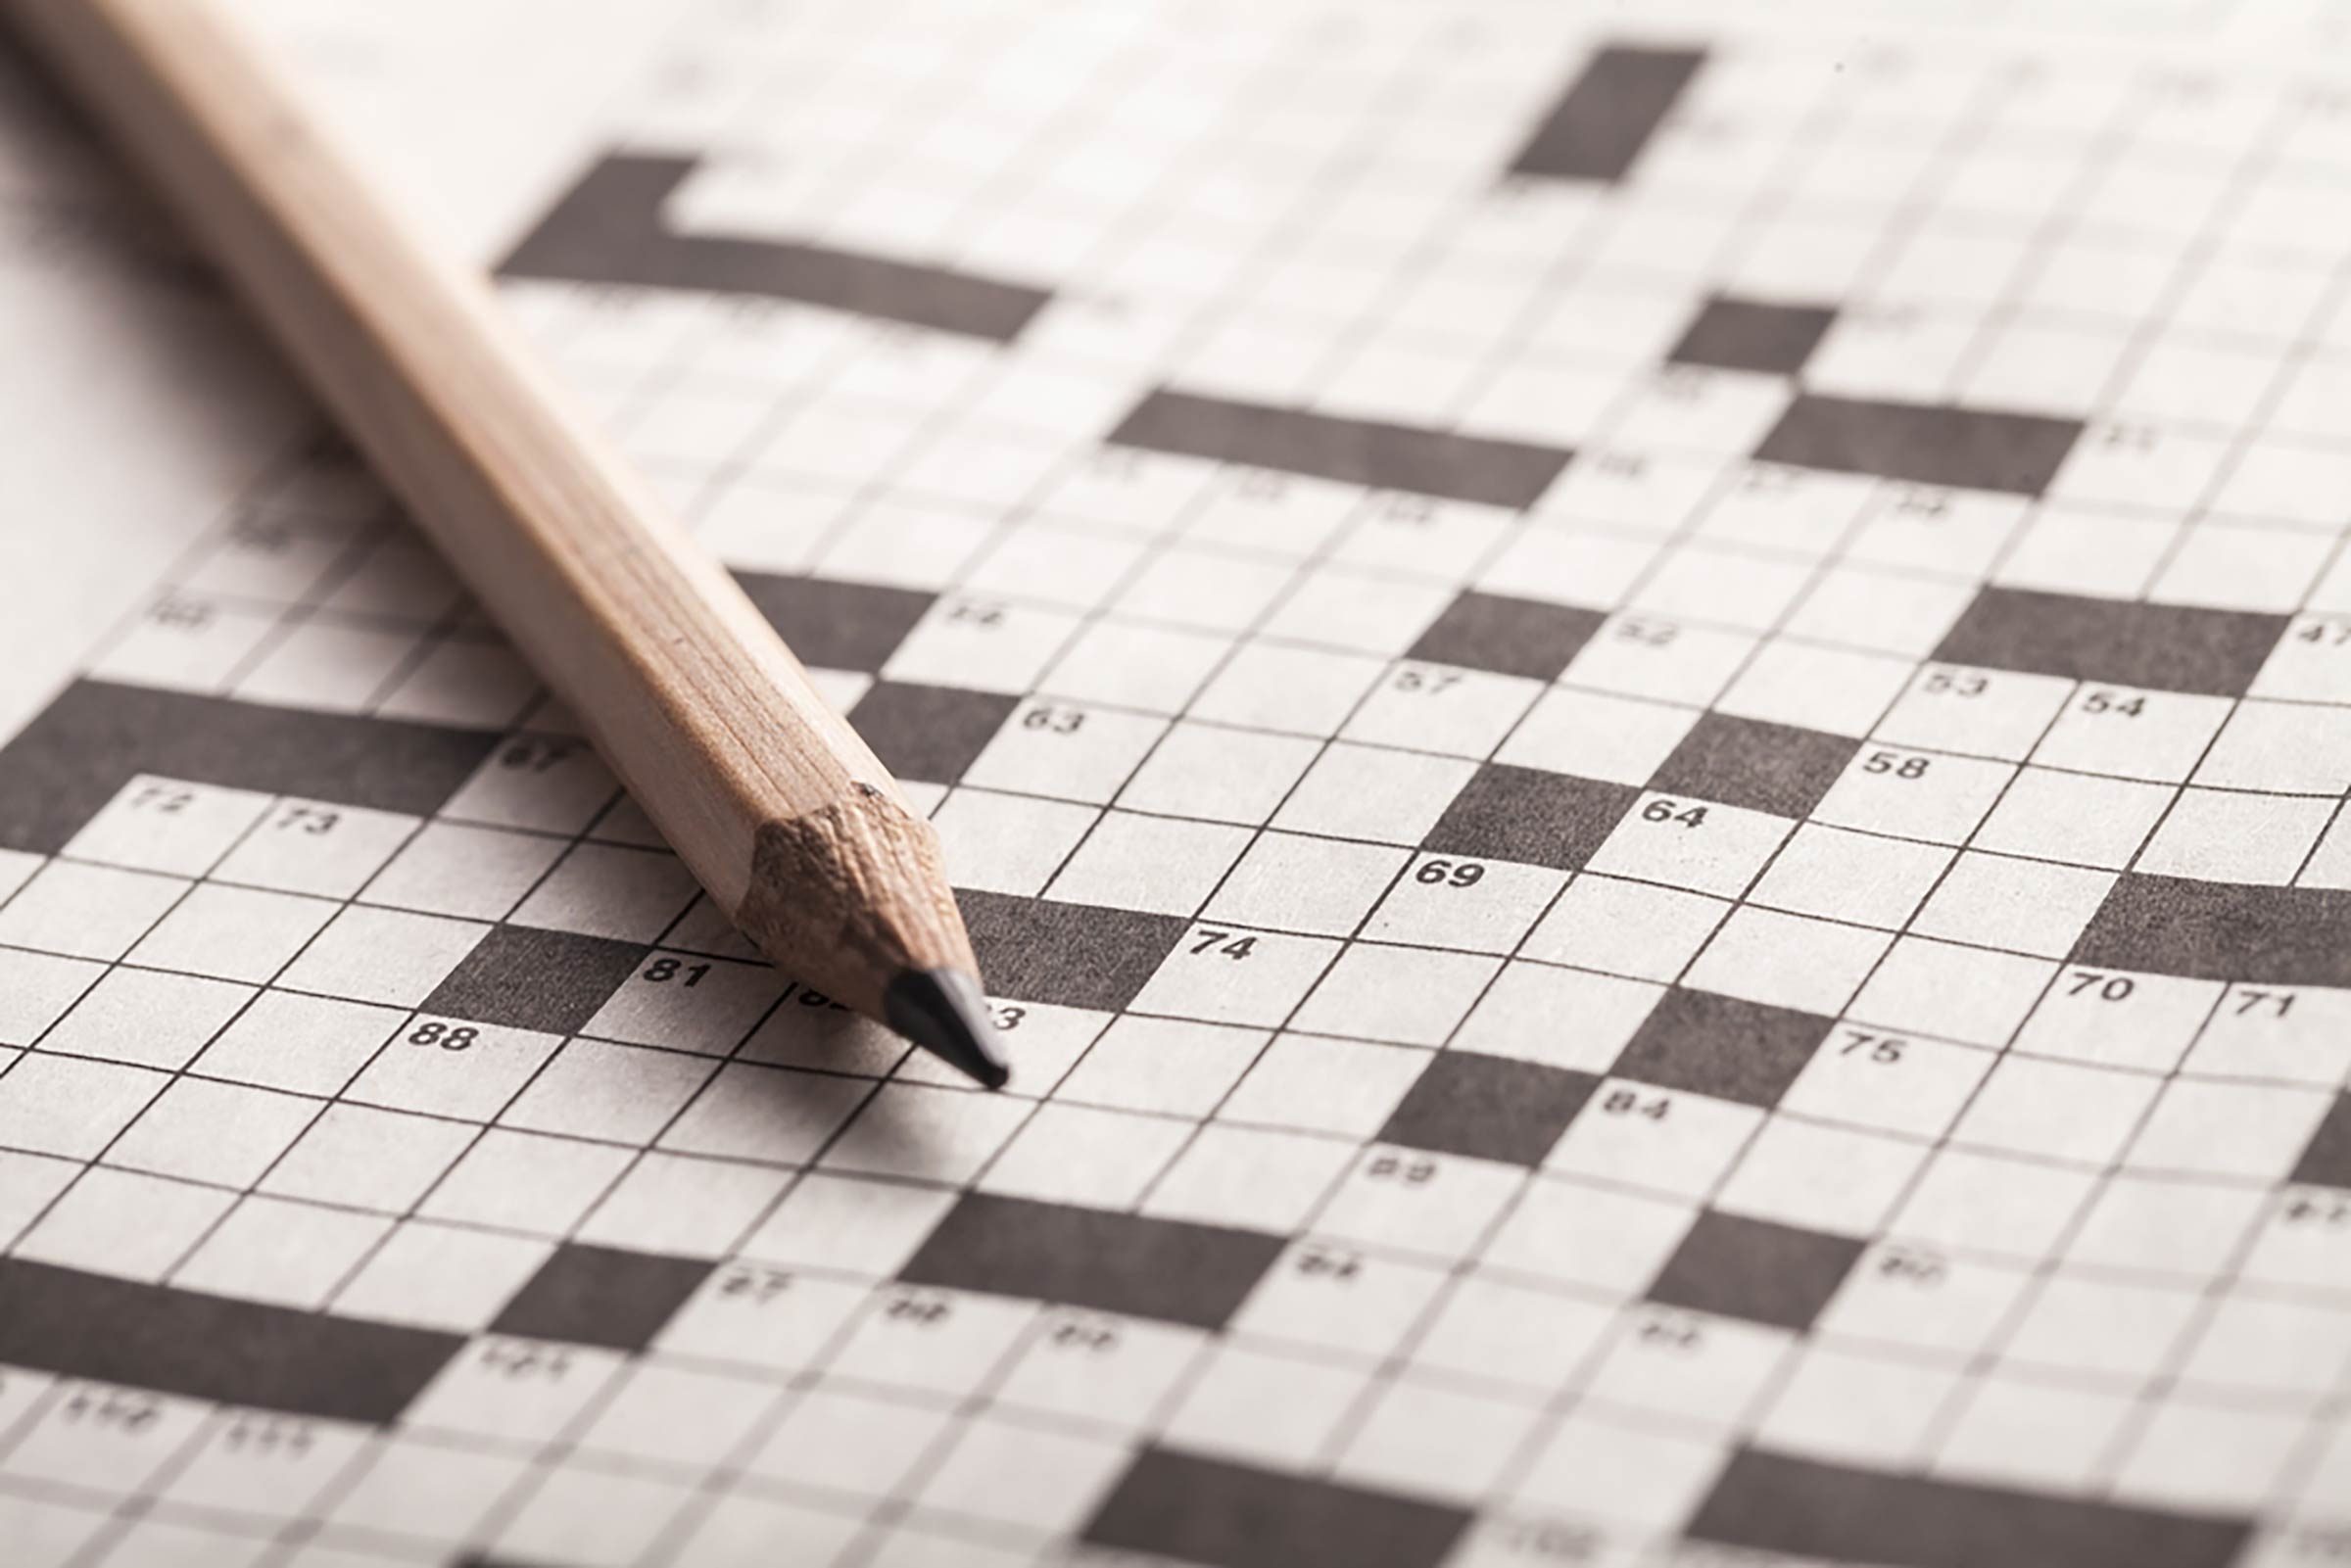 Yes Doing Crossword Puzzles CAN Make You Smarter Reader #39 s Digest